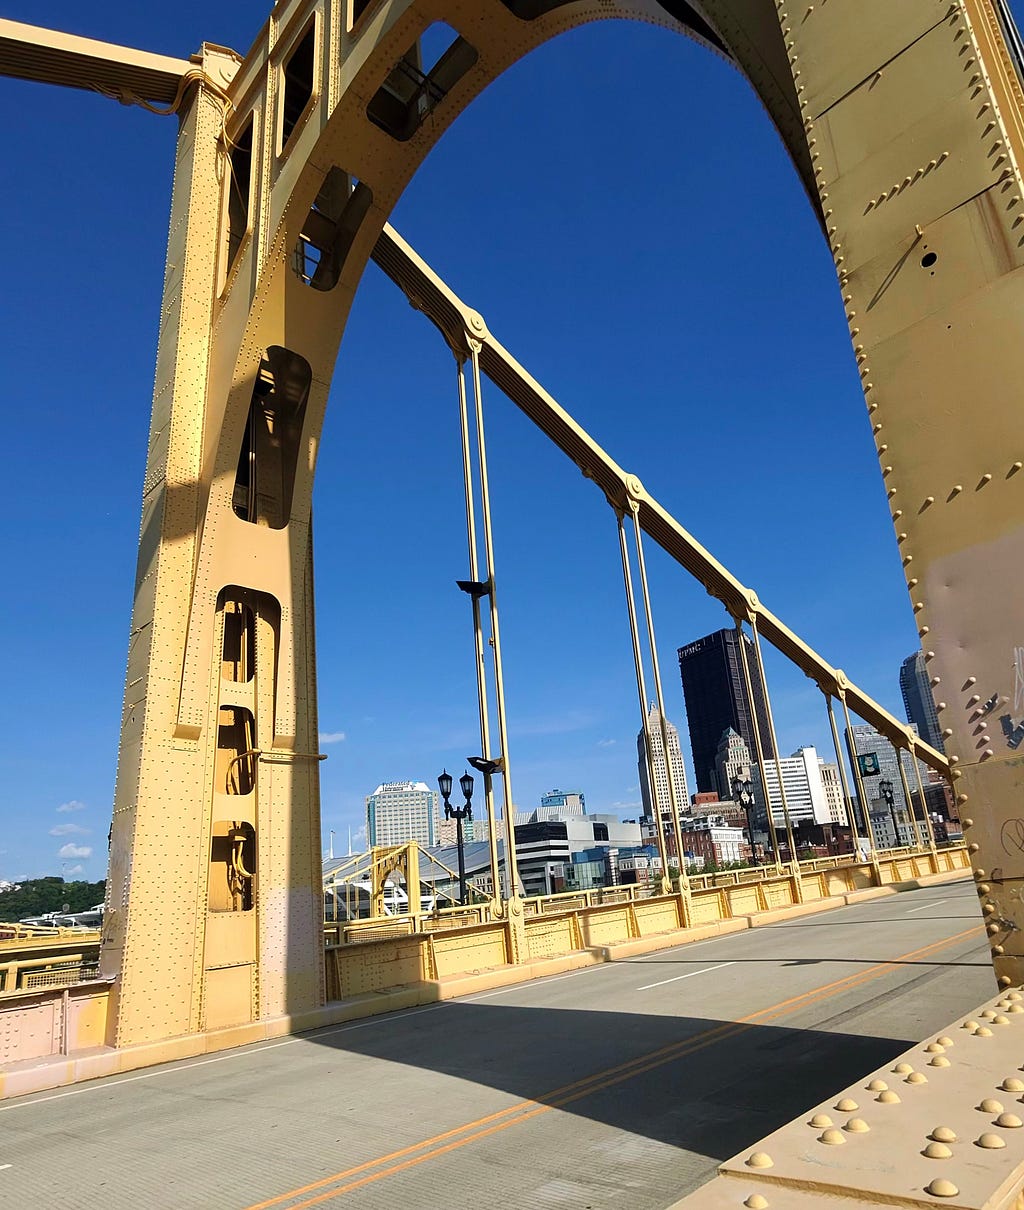 Picture of a bridge in Pittsburg